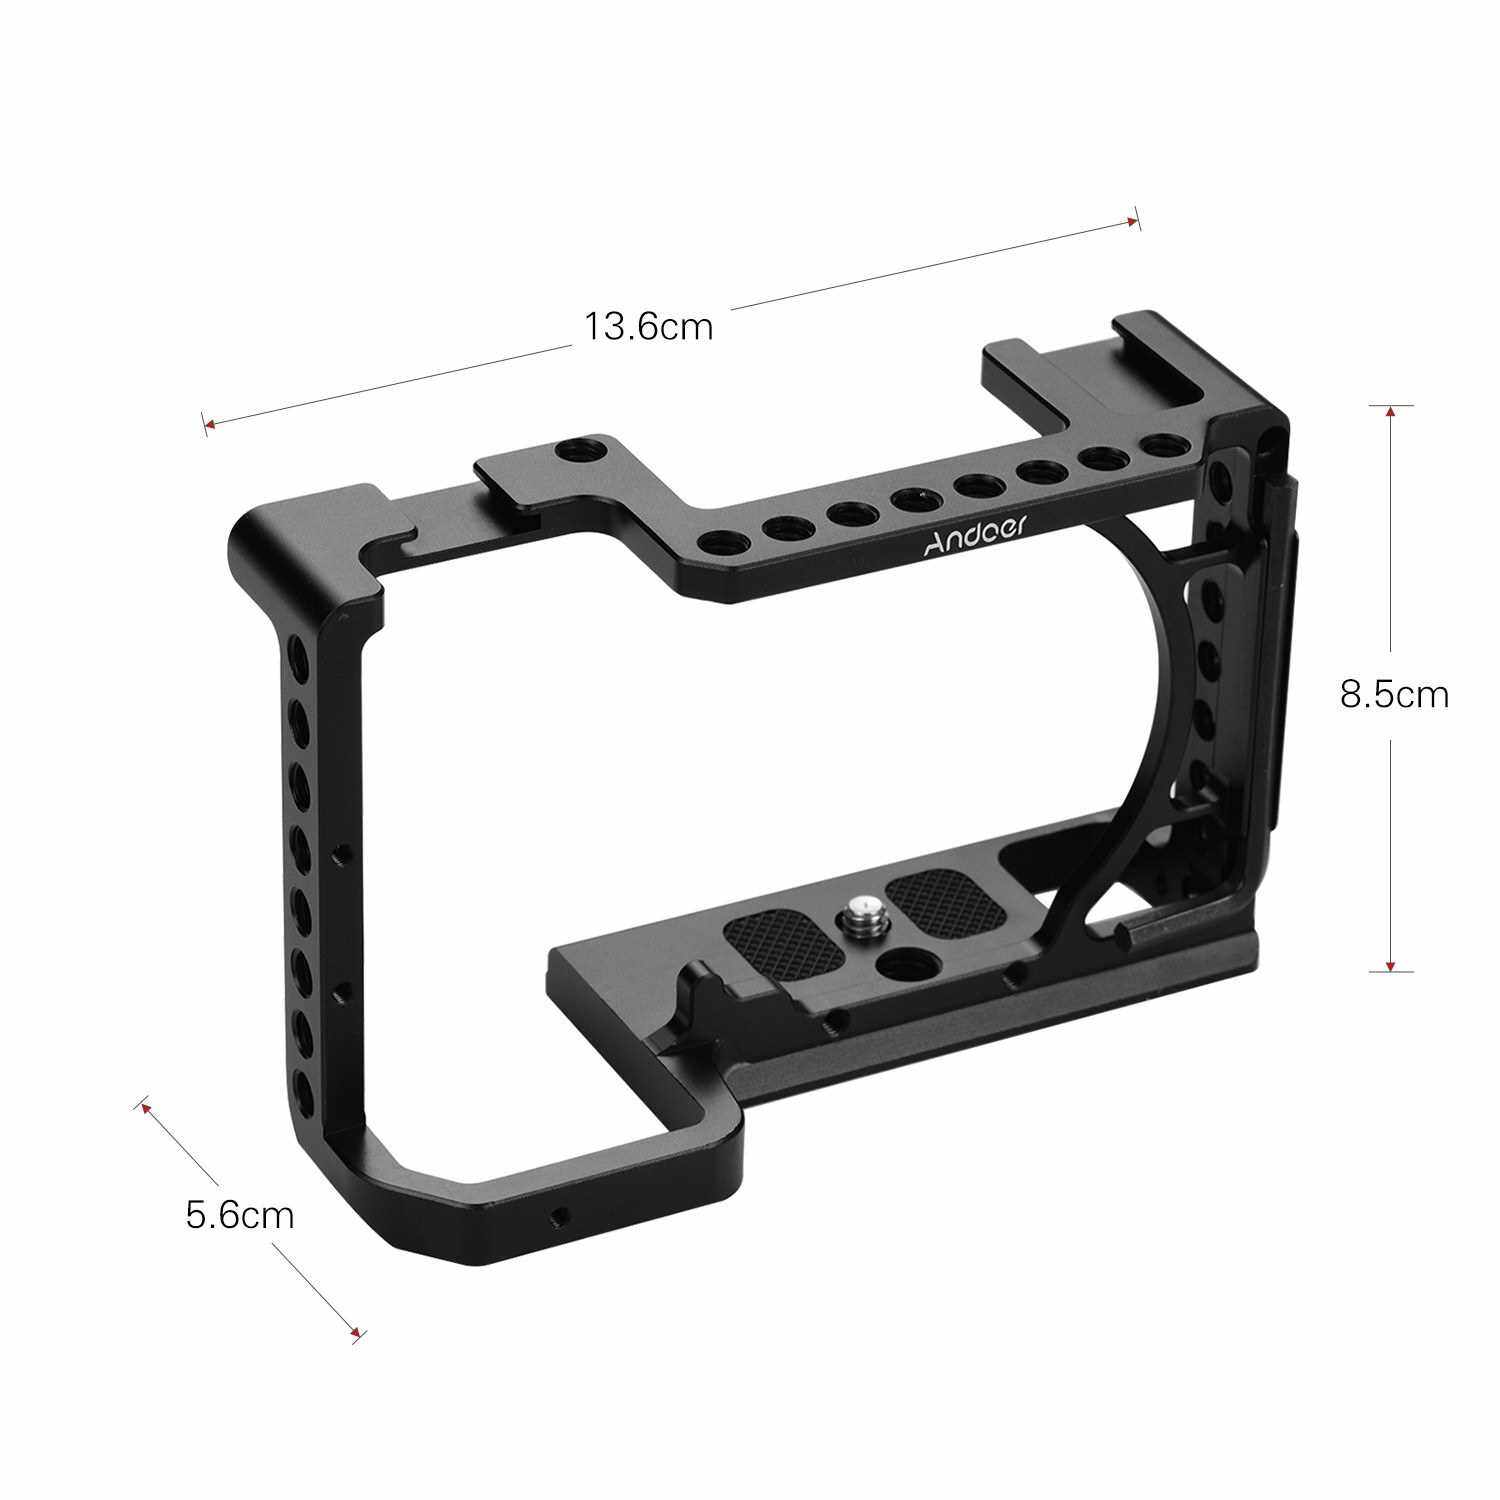 Andoer Professional Photography Camera Cage Kit Aluminum Alloy Camera Case Bracket with 1/4" 3/8" Extension Thread Holes and Cold Shoes Mini Wrench Compatible with Sony A6600,A6500,A6400,A6300,A6000 (Standard)